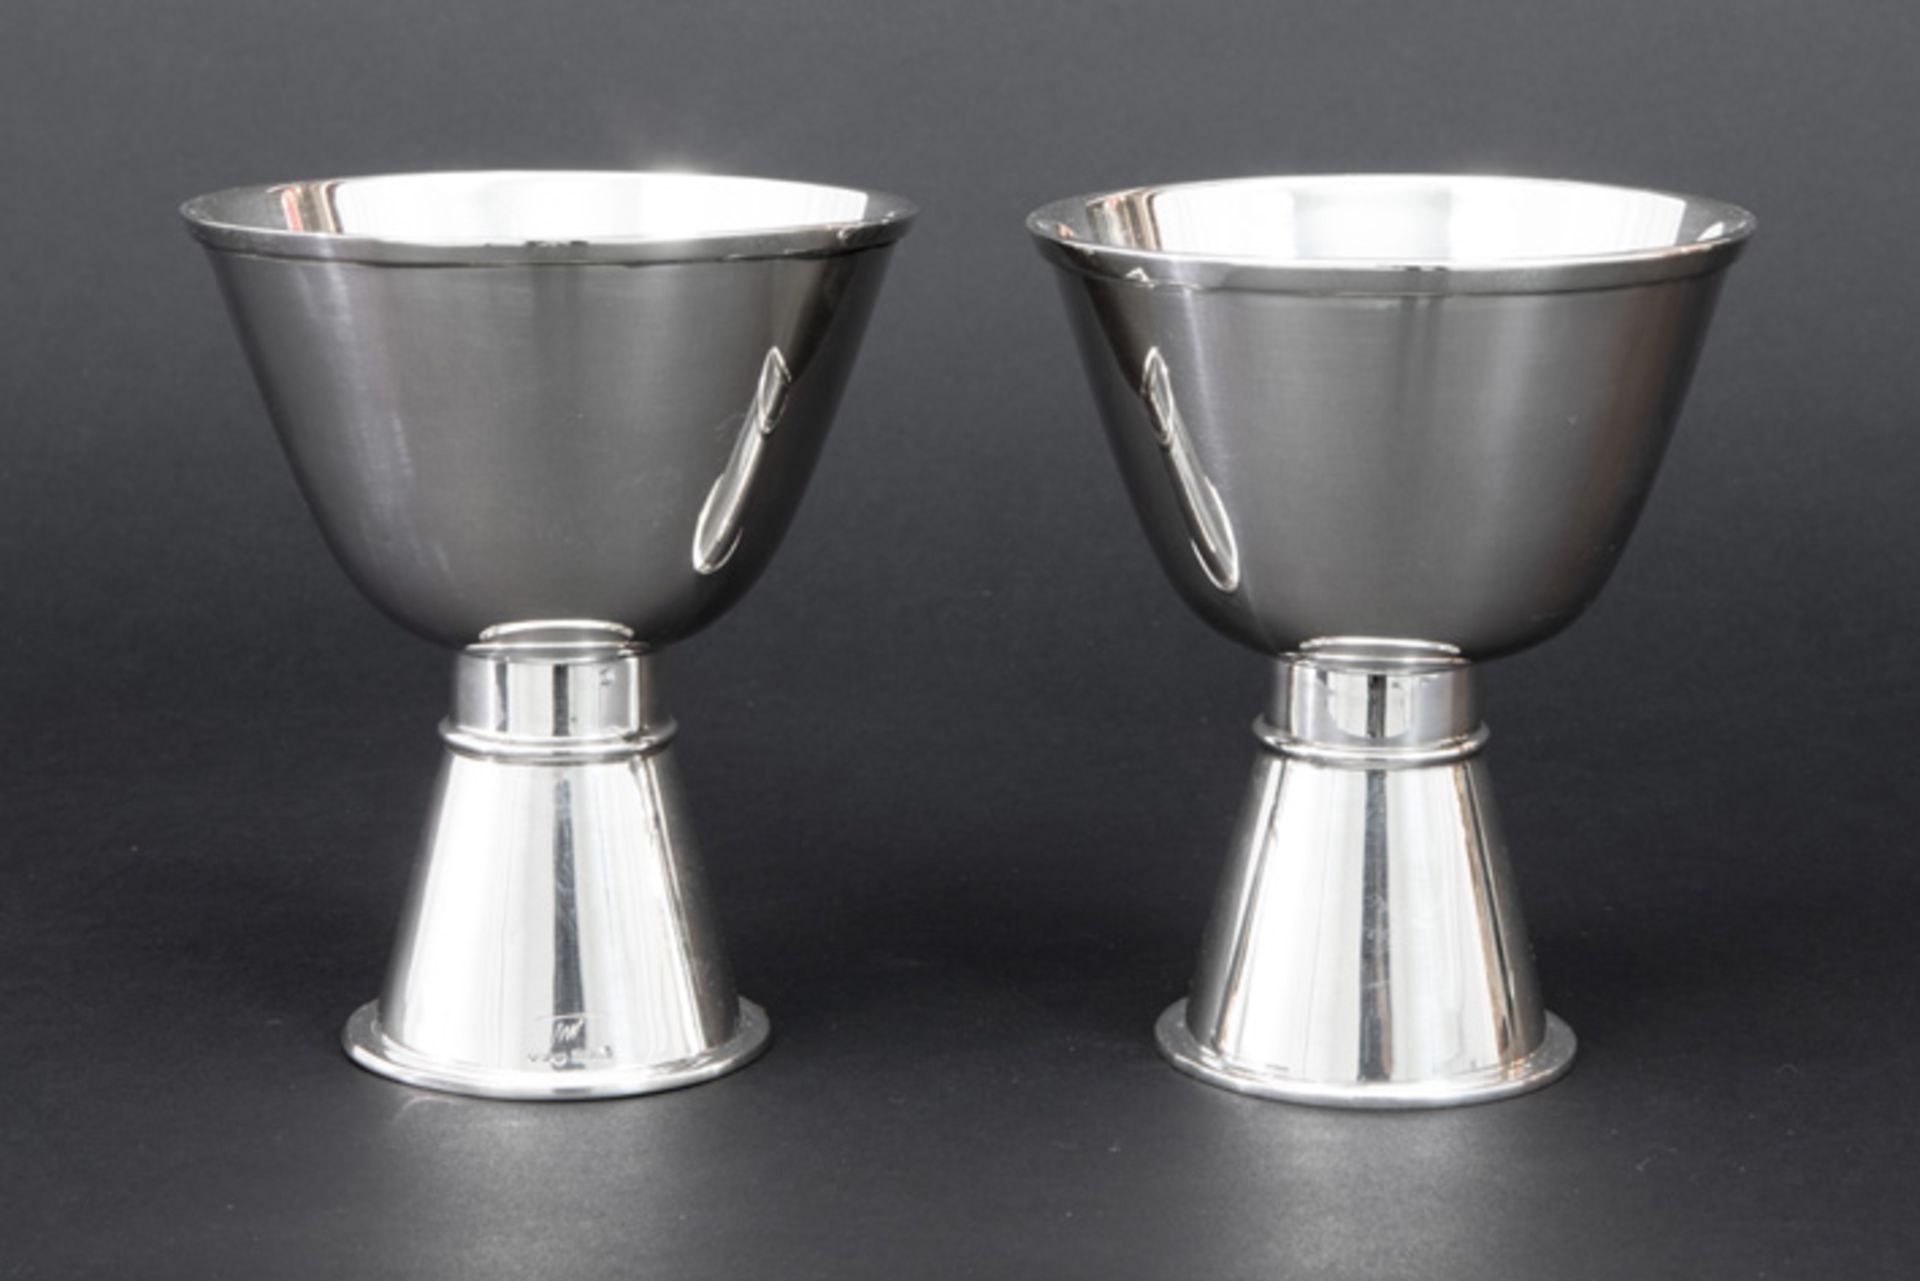 pair of Tapio Wirkkala design glasses in marked and 1977 dated silver - with his monogram||TAPIO WIR